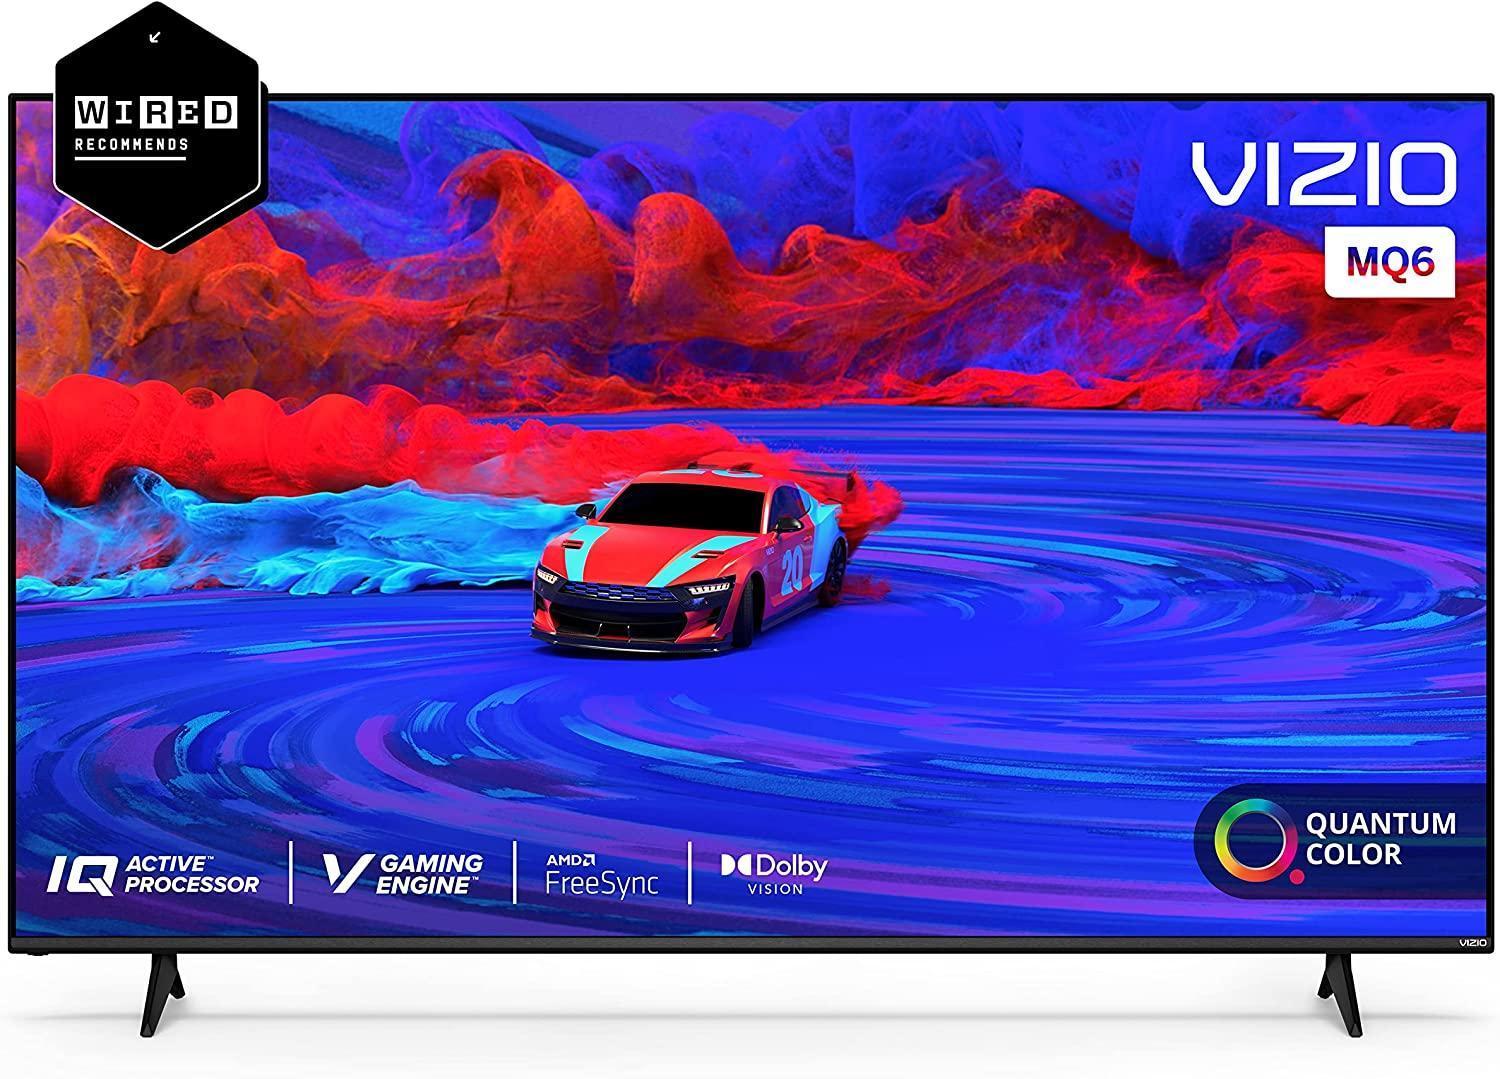 VIZIO 75-Inch M-Series 4K QLED HDR Smart TV with Voice Remote, Dolby Vision, HDR10+, Alexa Compatibility, VRR with AMD FreeSync, M75Q6-J03, 2022 Model